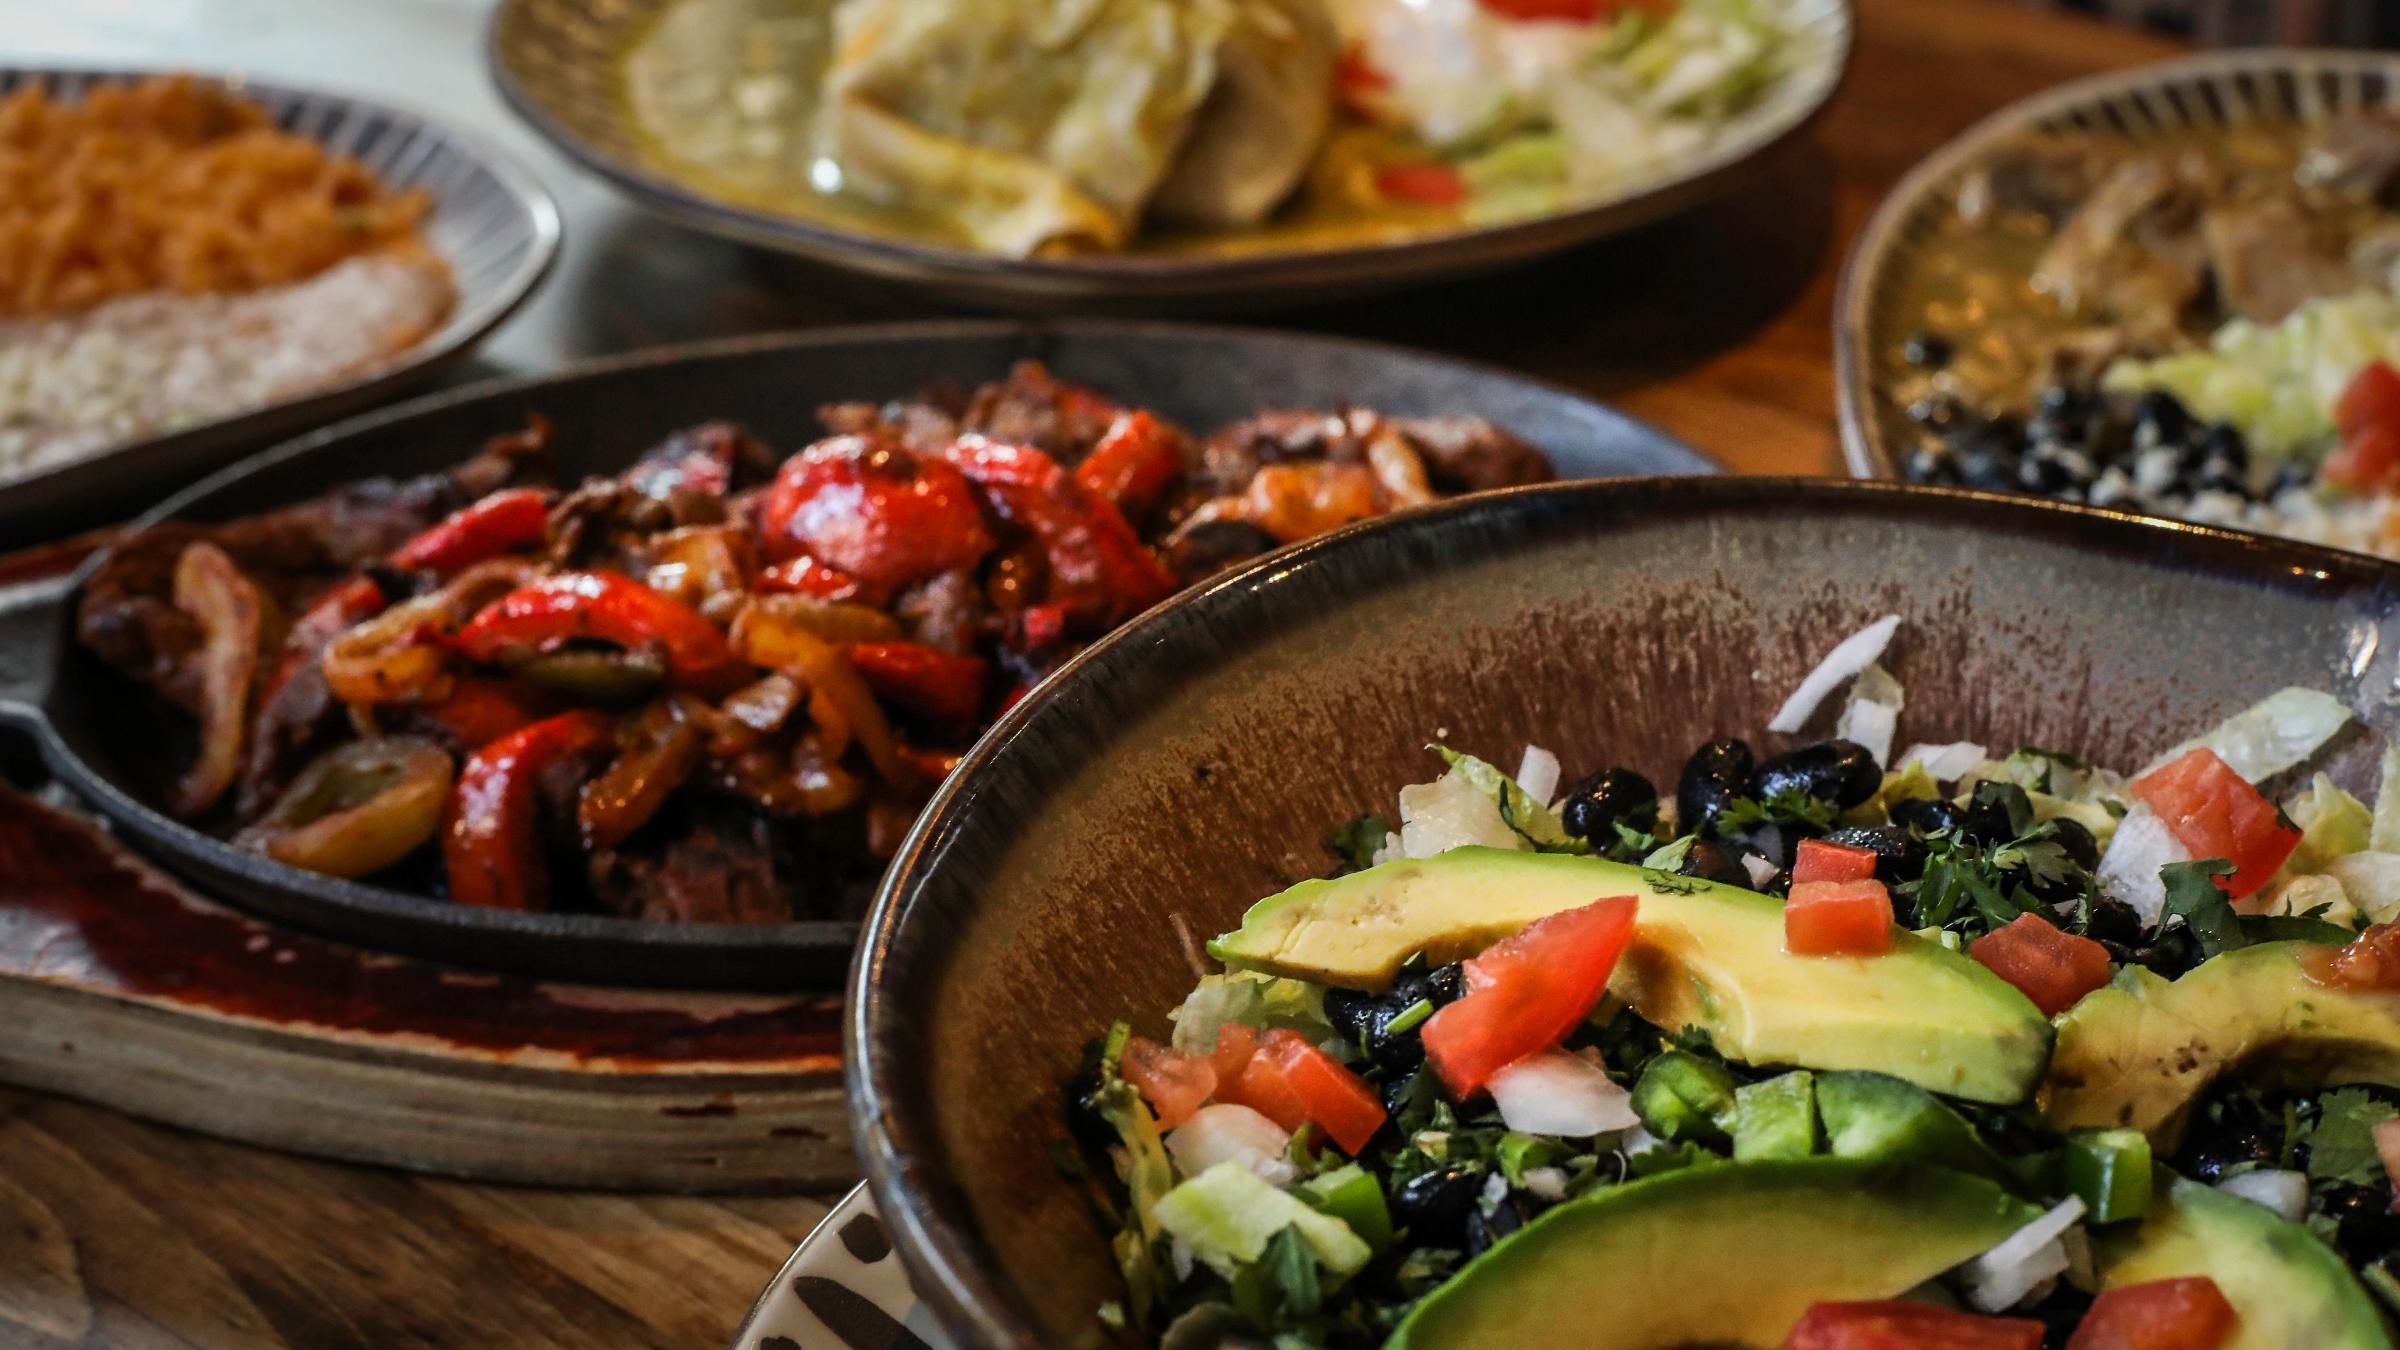 Fajitas are served at Tremigo Mexican Kitchen in Squaw Valley